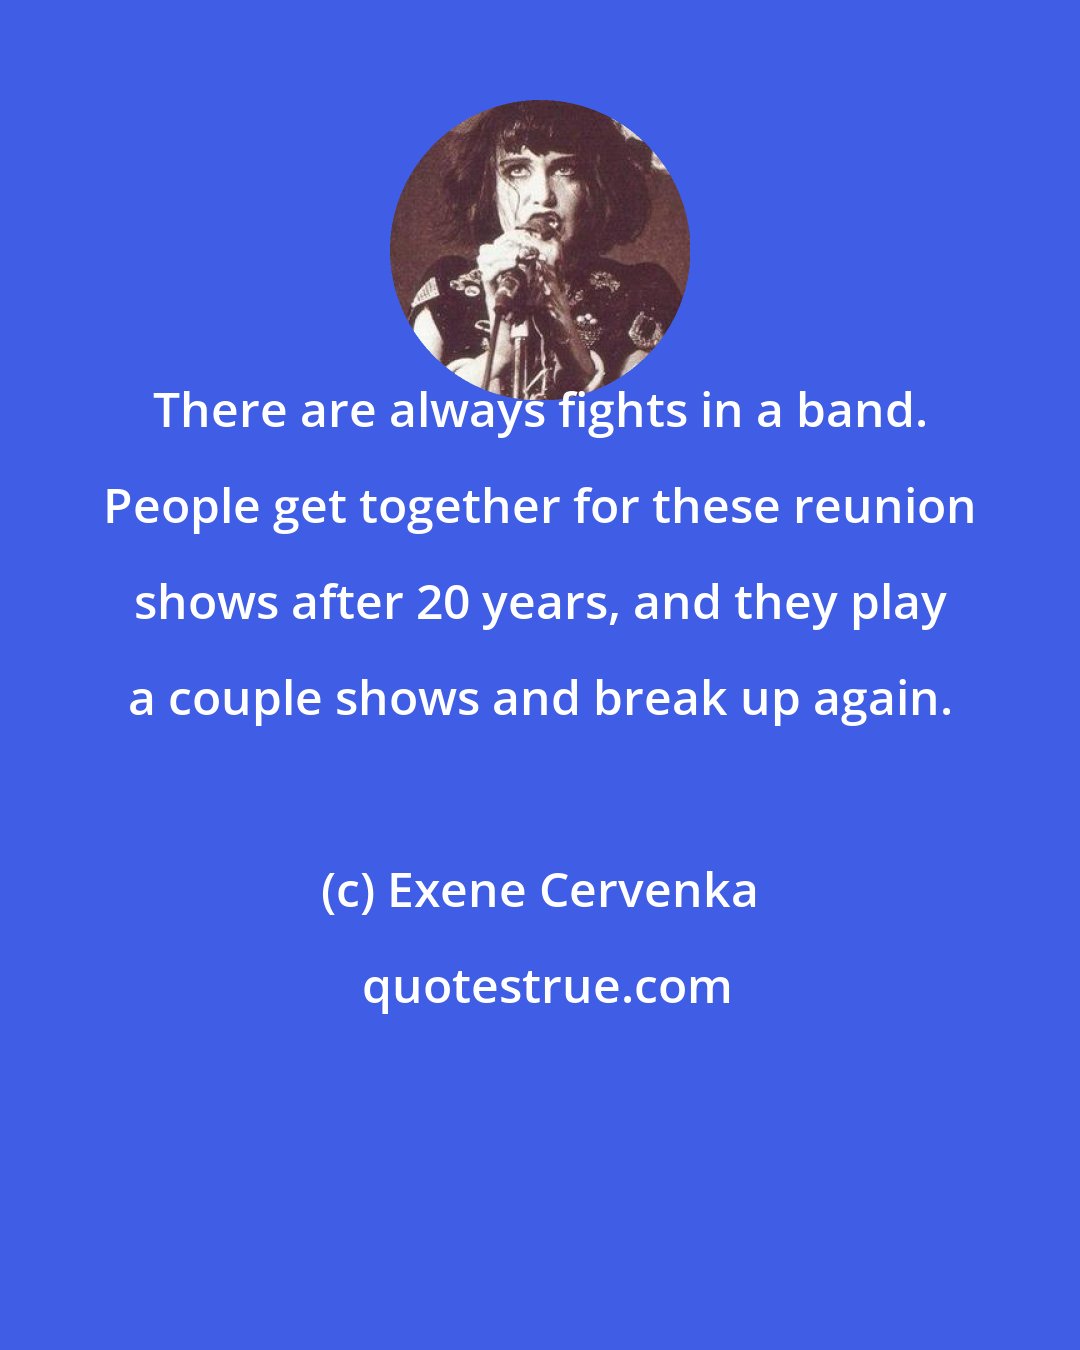 Exene Cervenka: There are always fights in a band. People get together for these reunion shows after 20 years, and they play a couple shows and break up again.